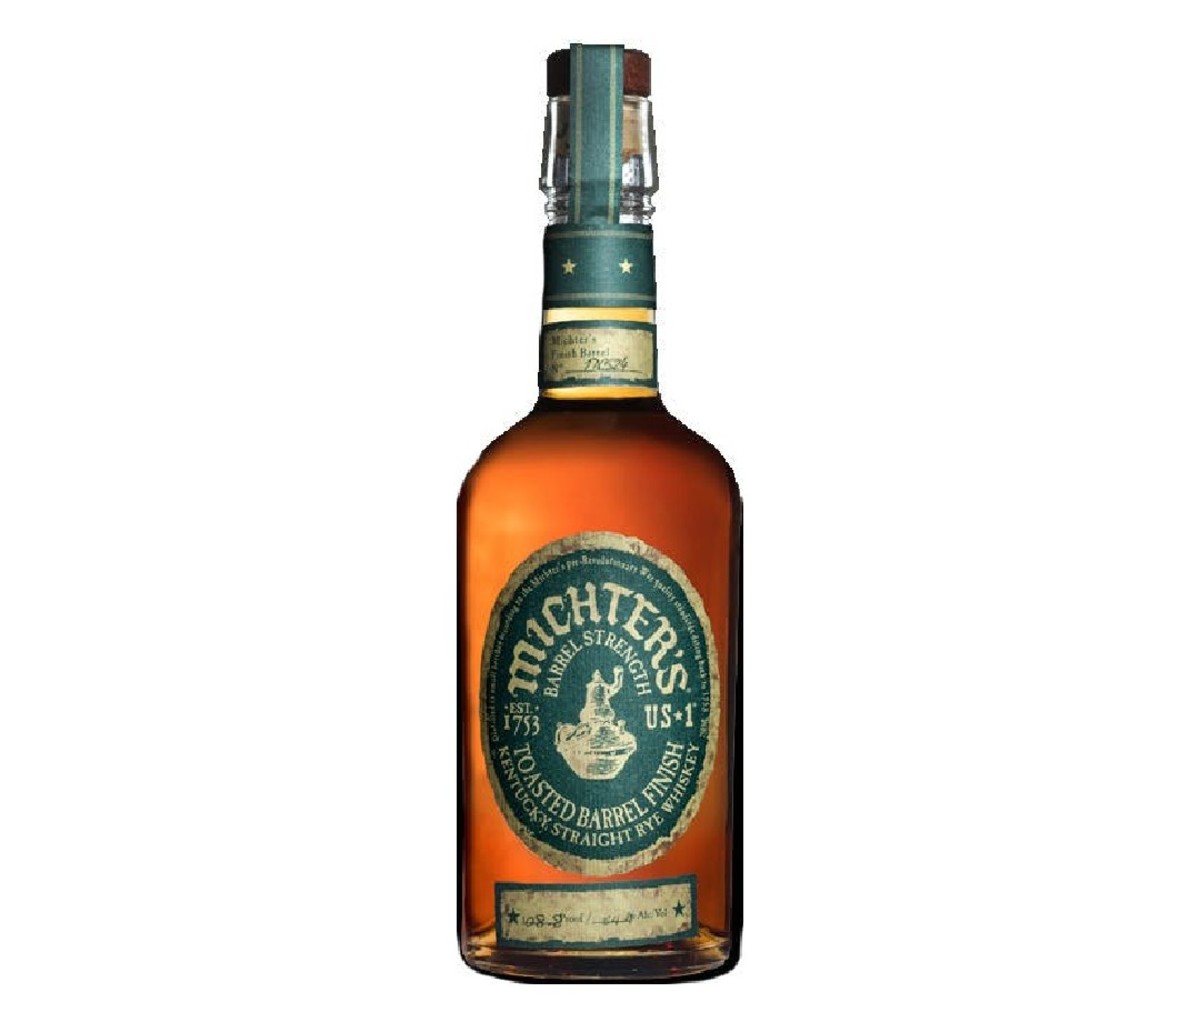 Michter’s Toasted Barrel Finish Rye